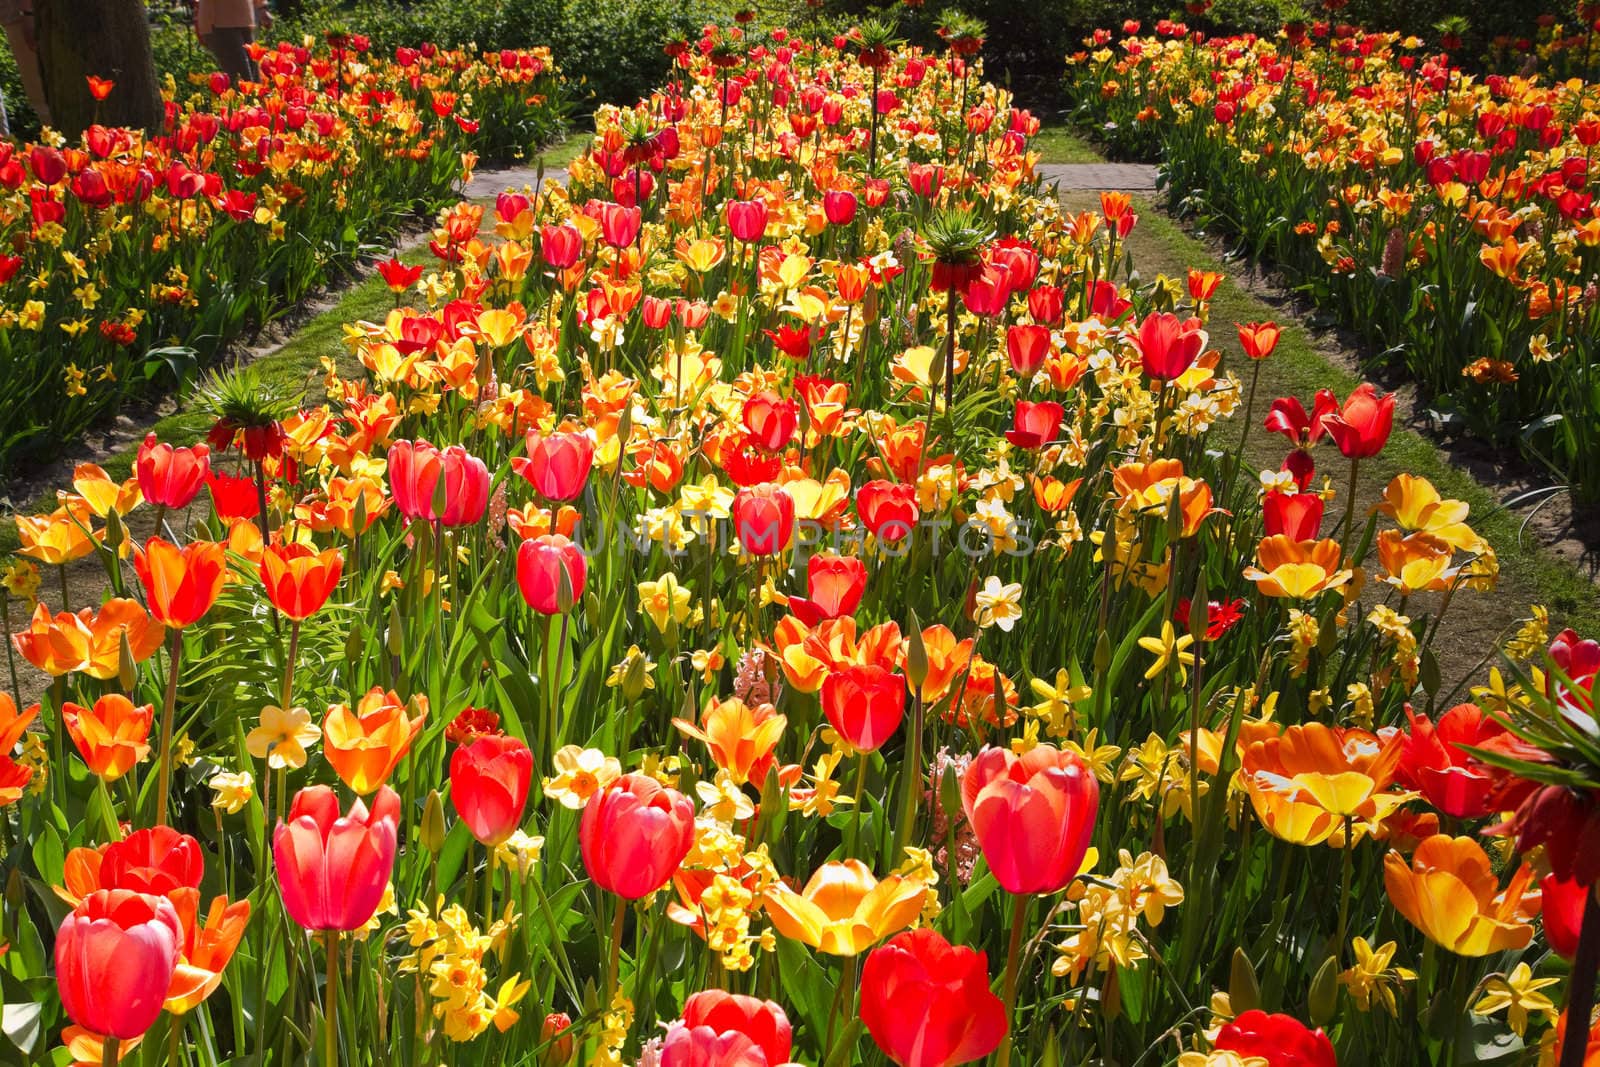 Flower-beds in garden with a mix of colorful tulips and daffodils in spring